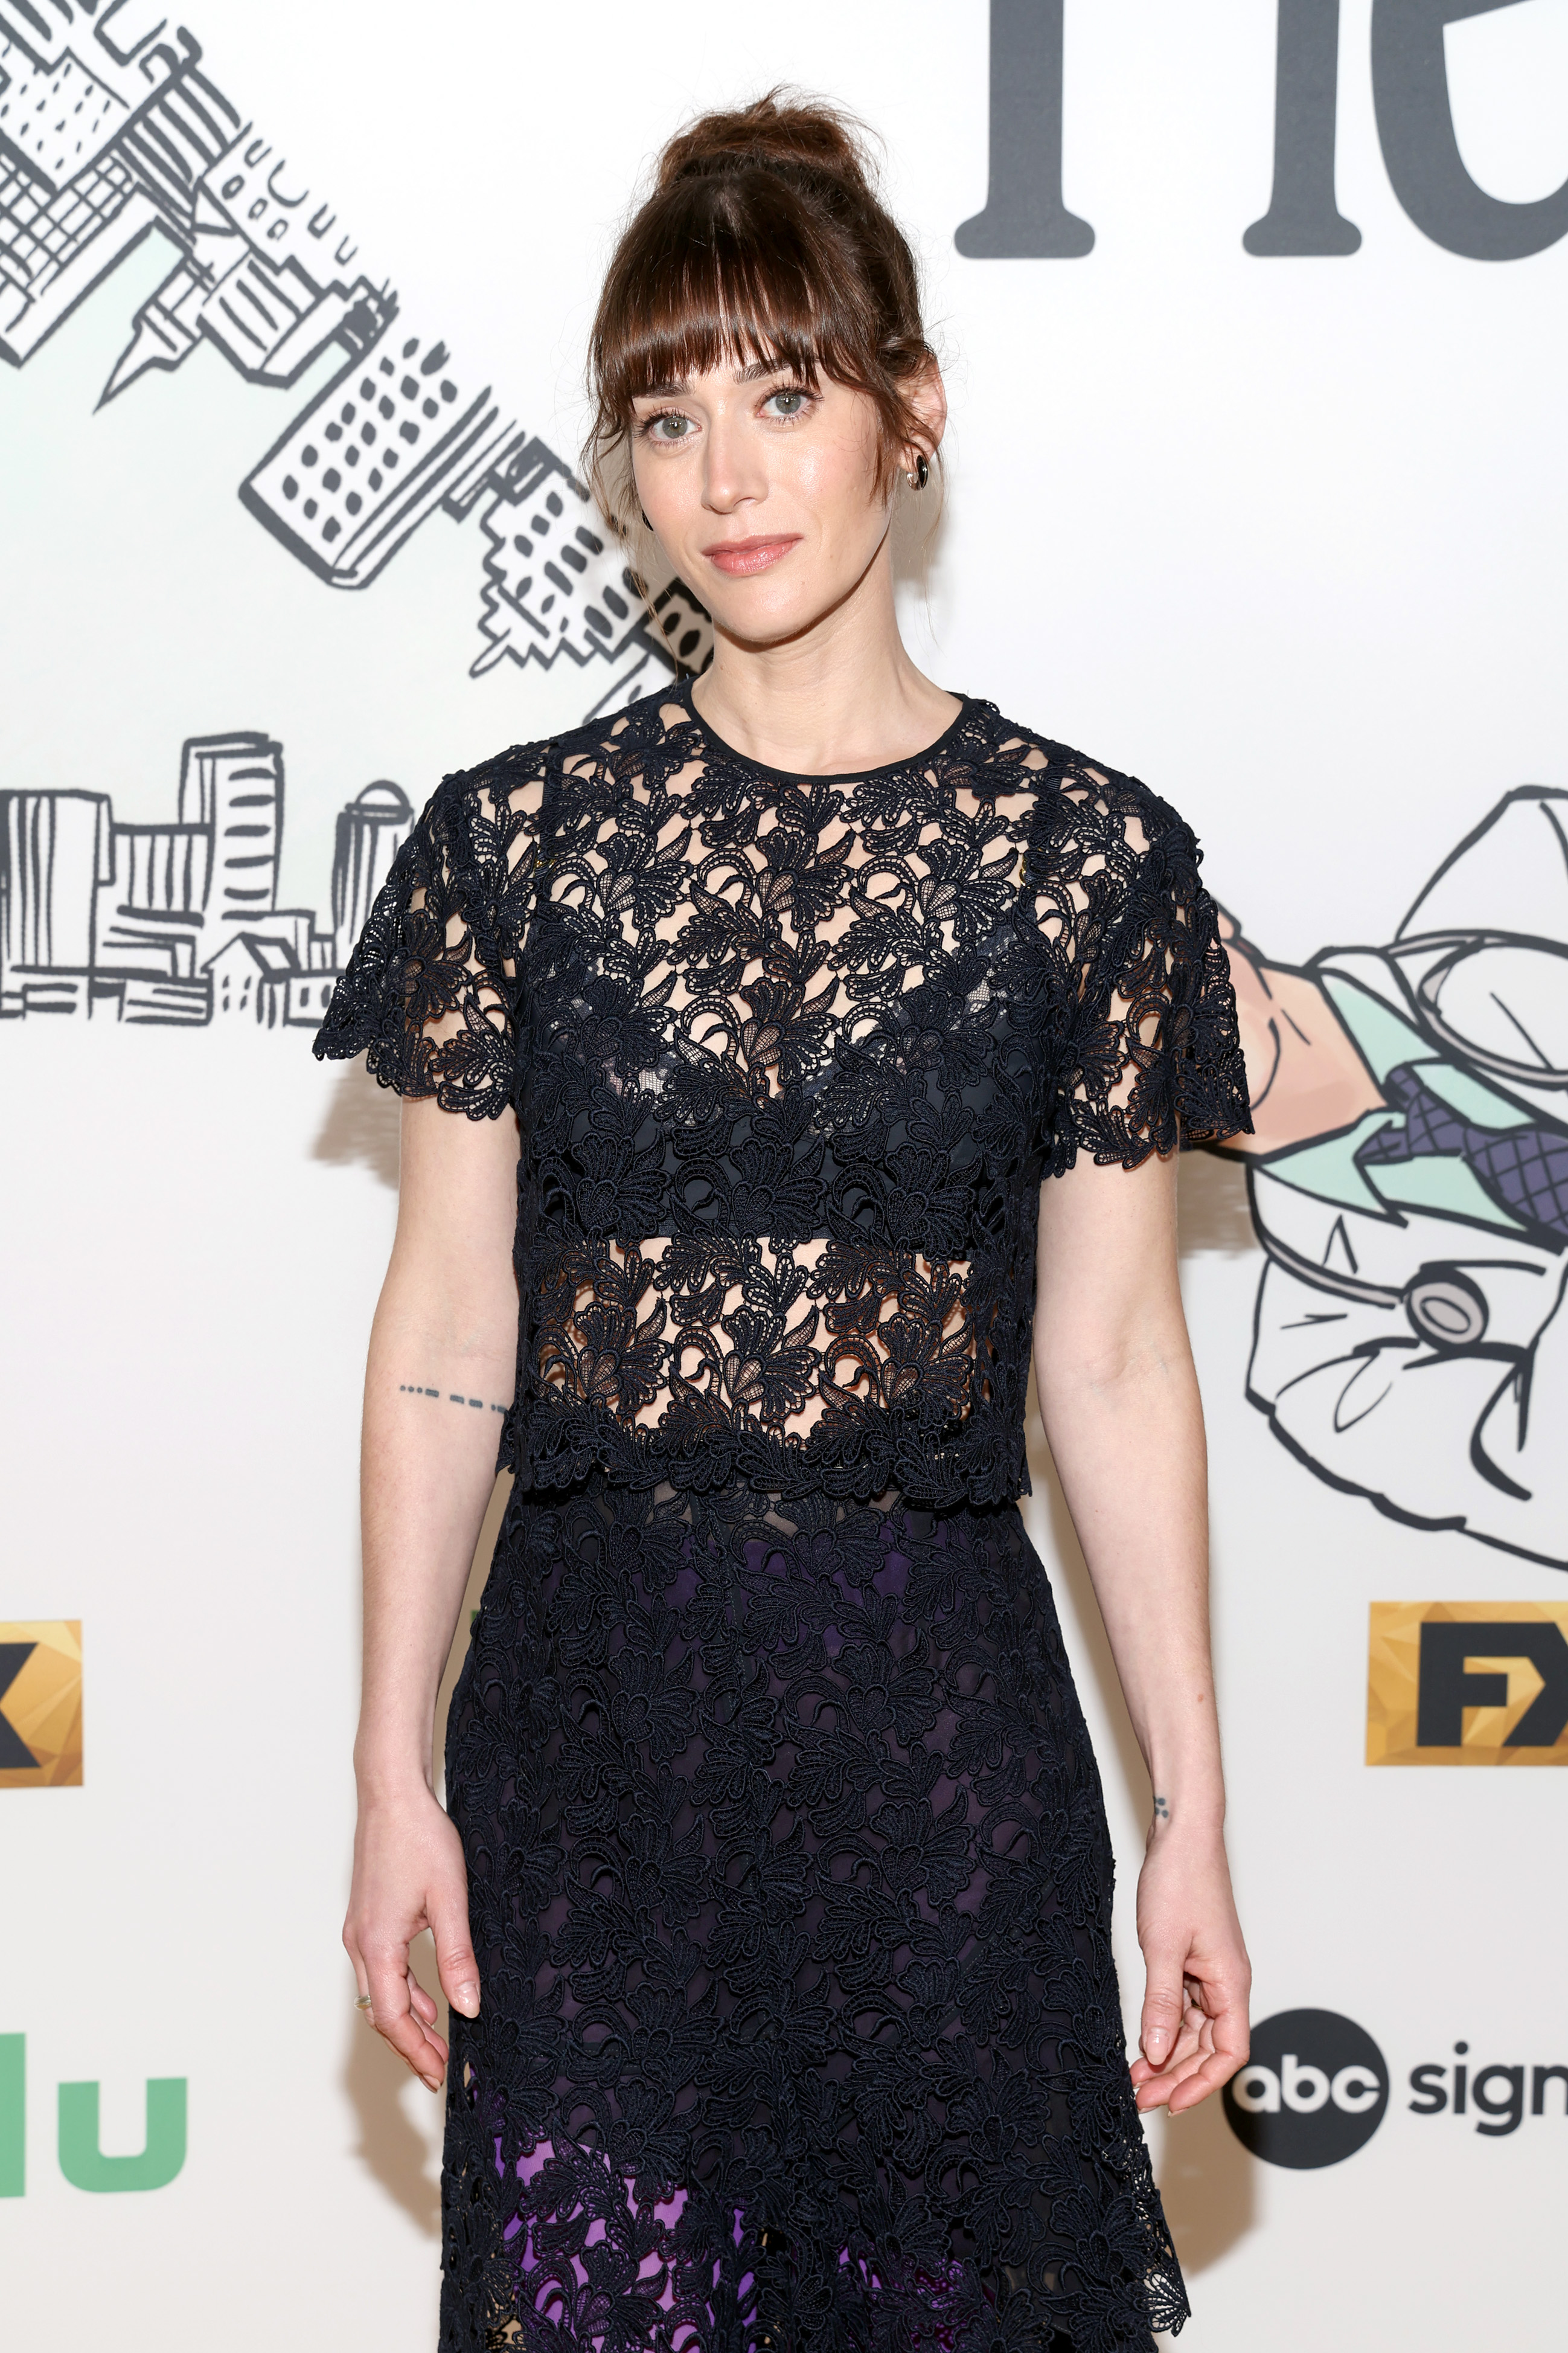 Lizzy Caplan at the FX's "Fleishman Is In Trouble" FYC event at in Los Angeles, California on May 09, 2023. | Source: Getty Images